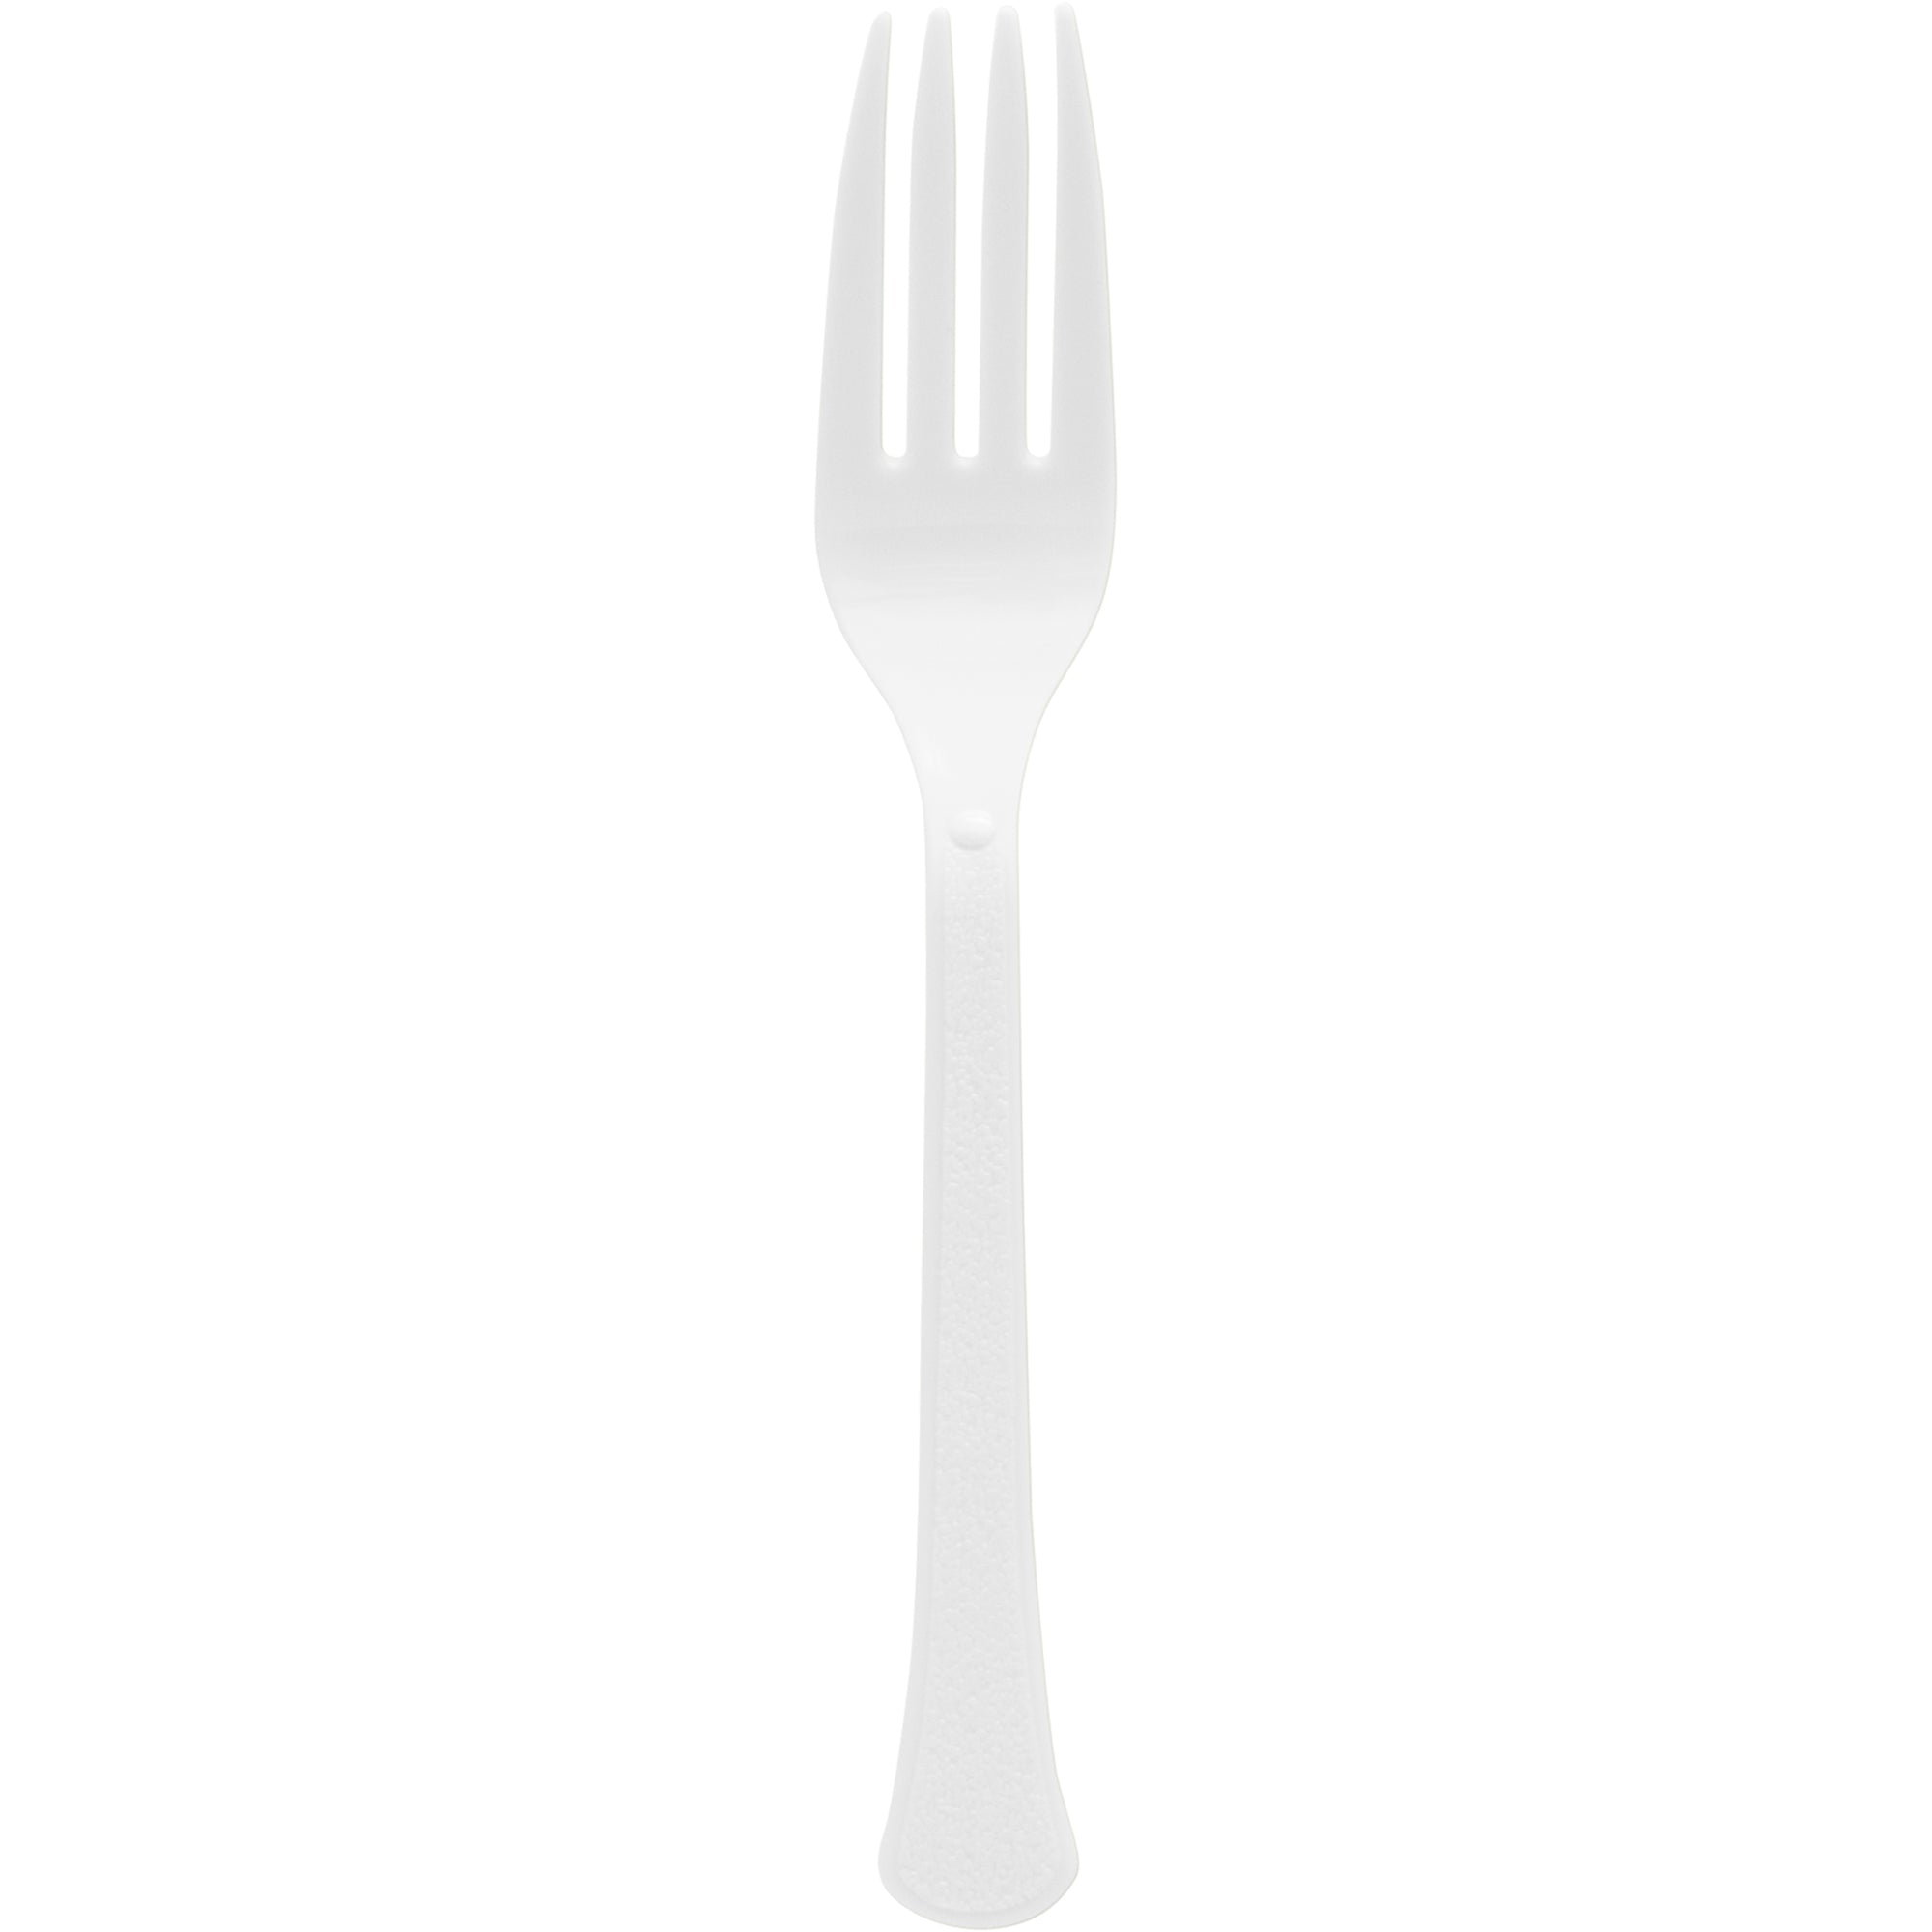 Frosty White Plastic Forks, 20 Count